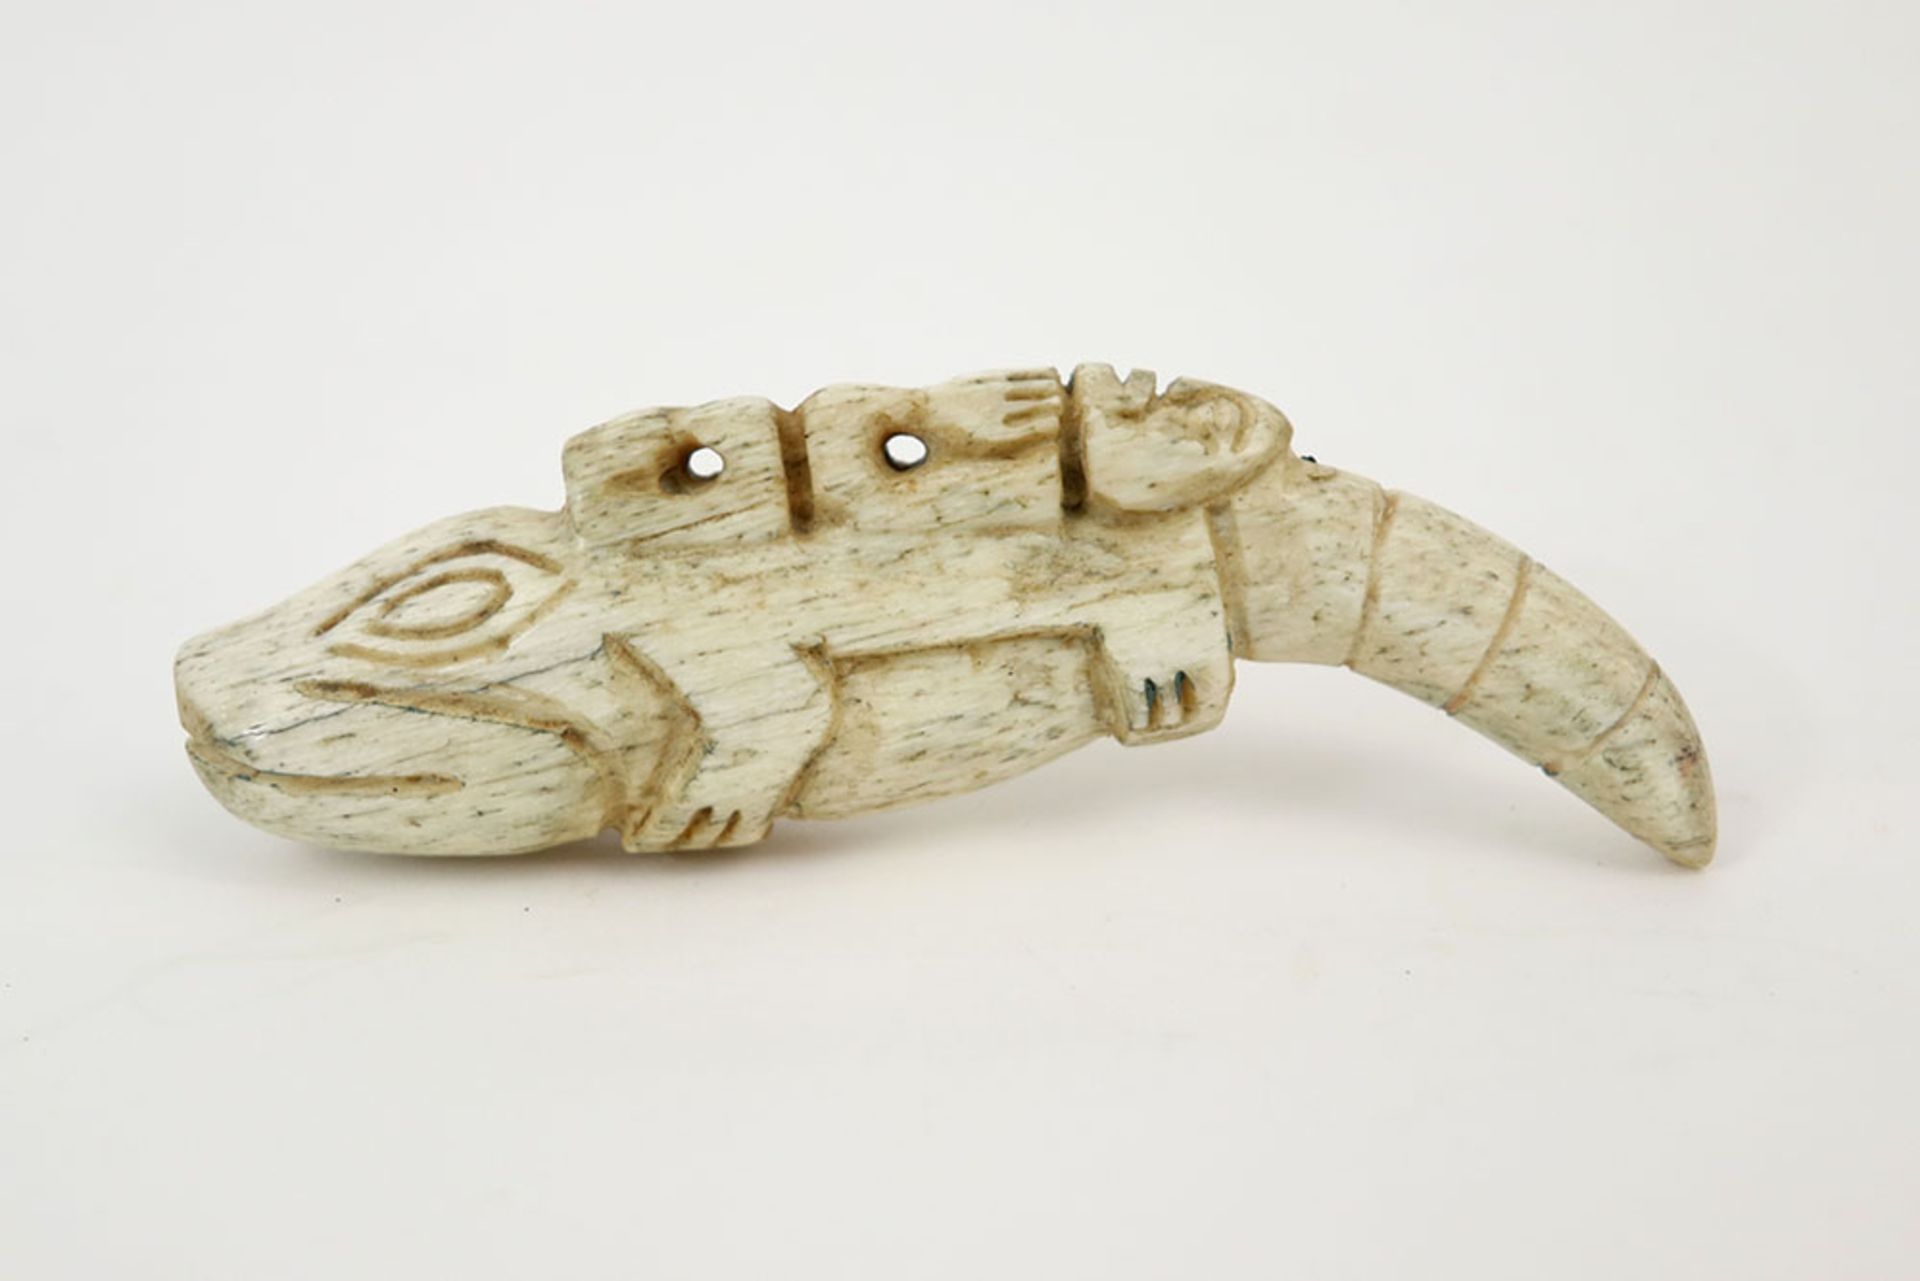 20th Cent. North West American Tlingit sculpture/sharm in cetacean bone with the typical - Image 2 of 4